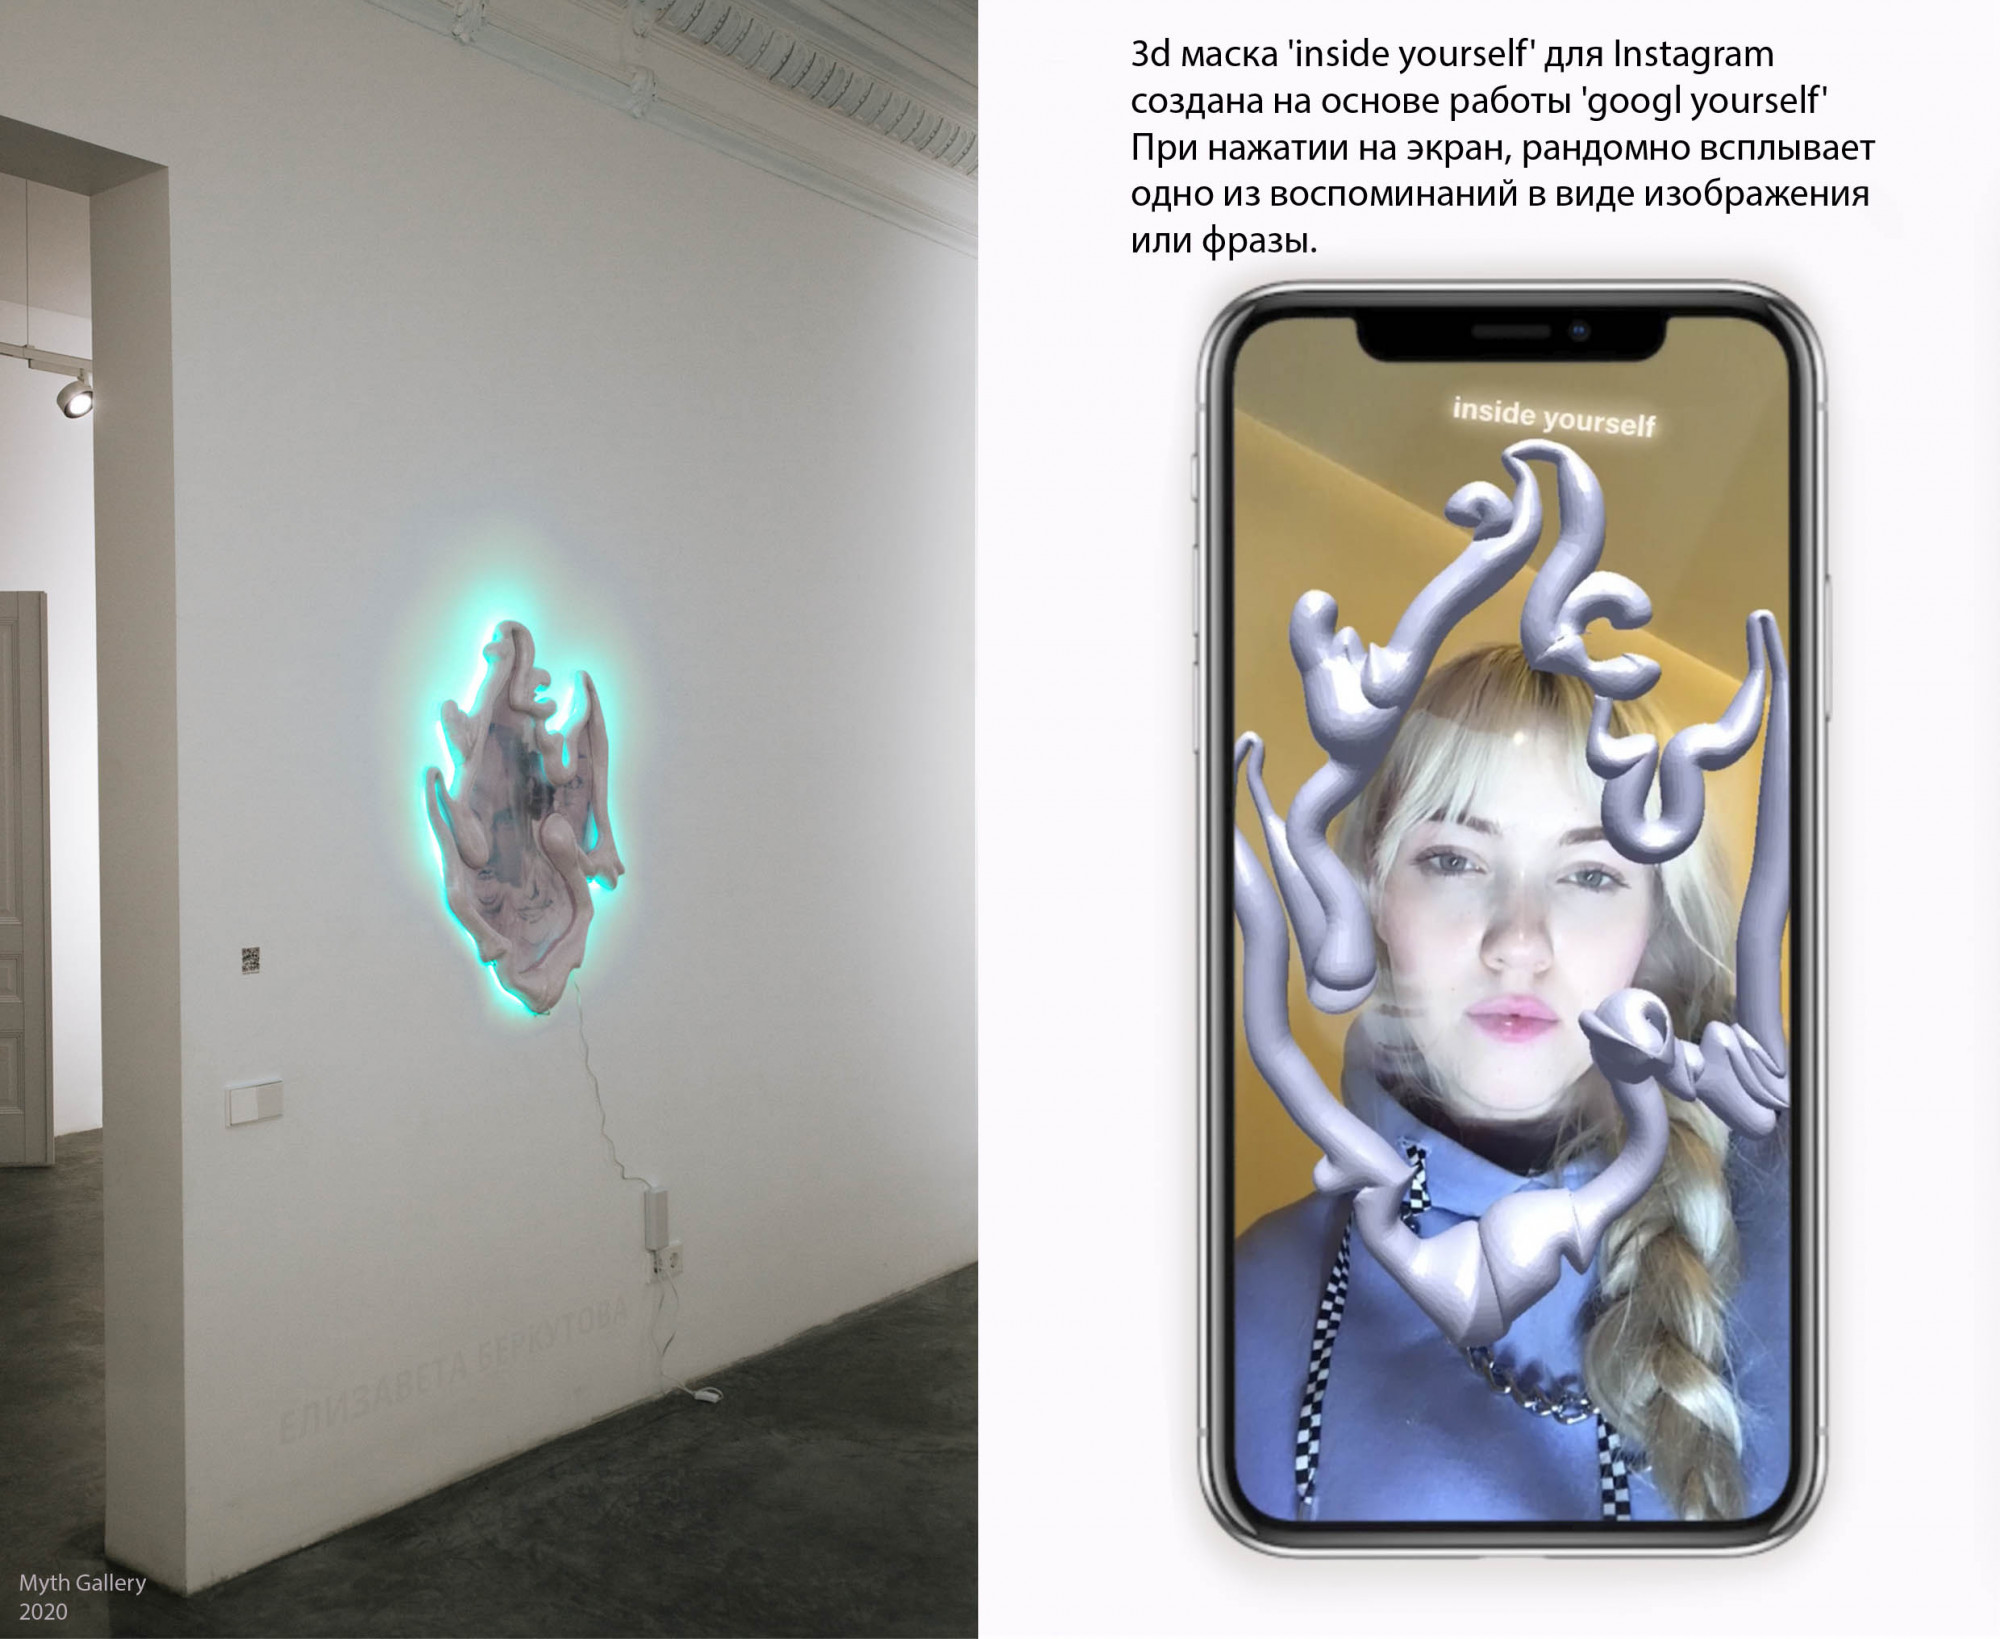 google yourself, 2020. Instagram face filter Inside Yourself that brings up a random memory as an image or text. For the Lurkmoar exhibition, MYTH Gallery, Saint Petersburg